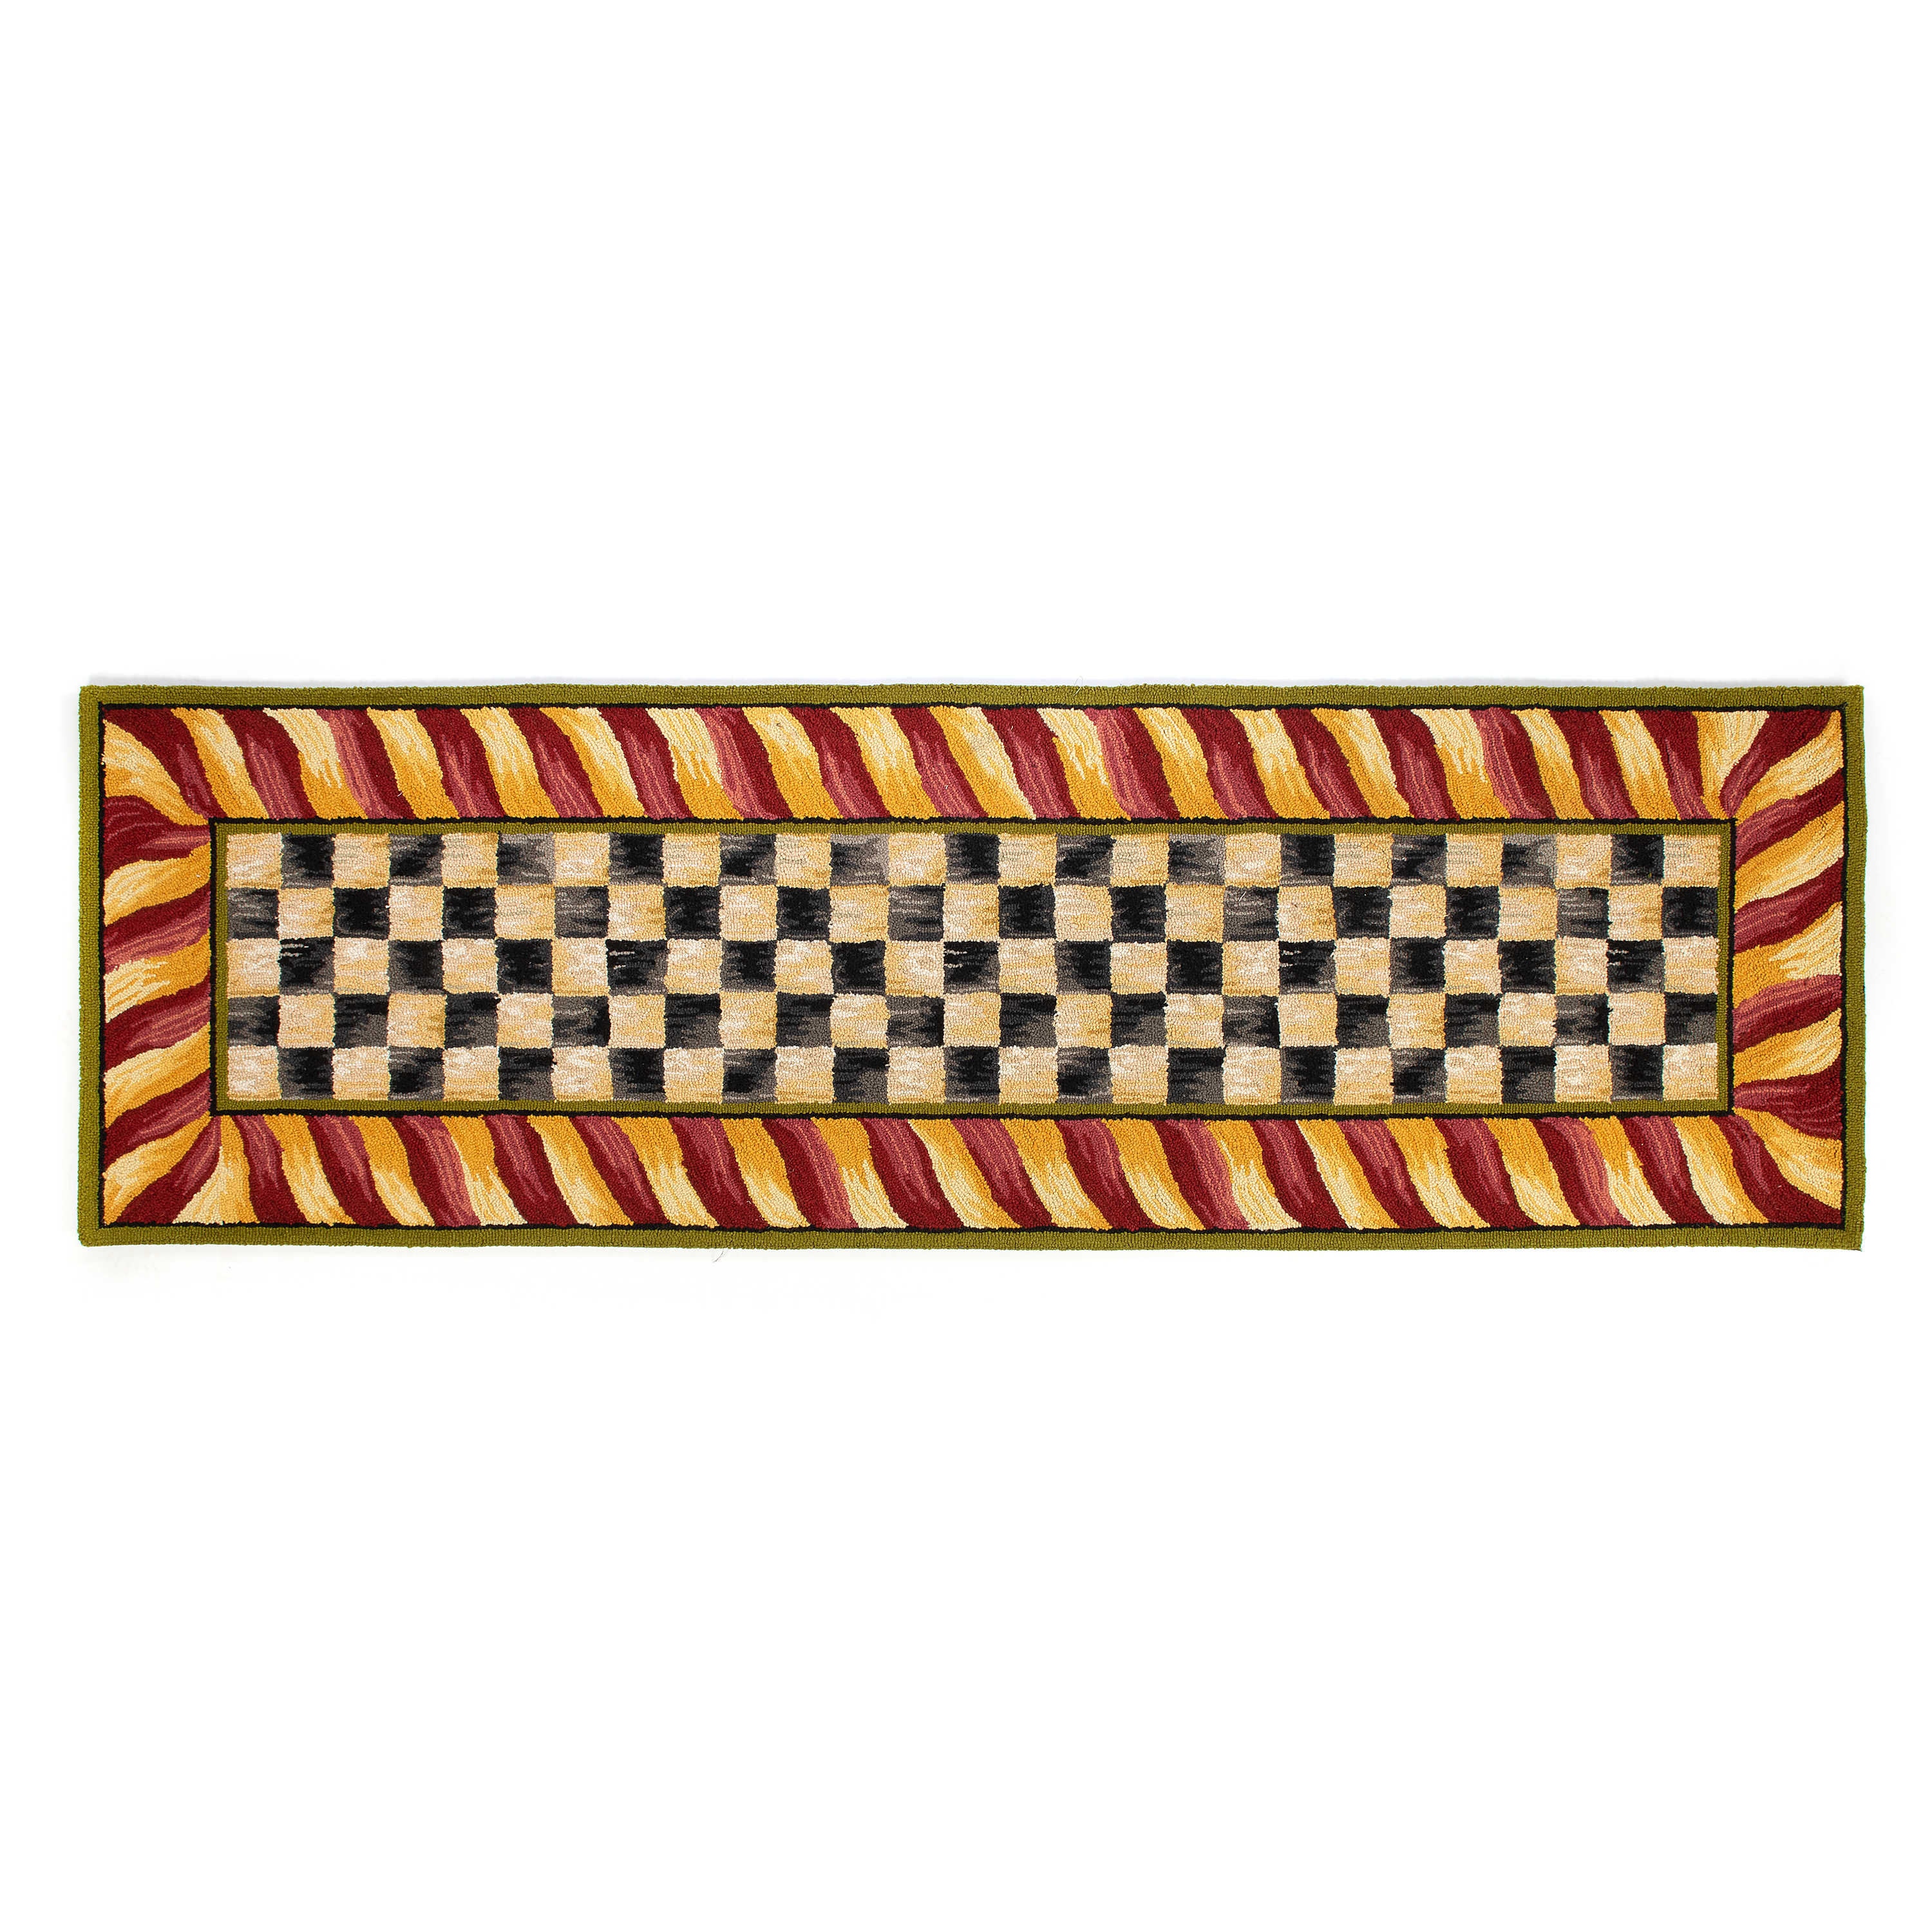 Courtly Check Red & Gold 2'6